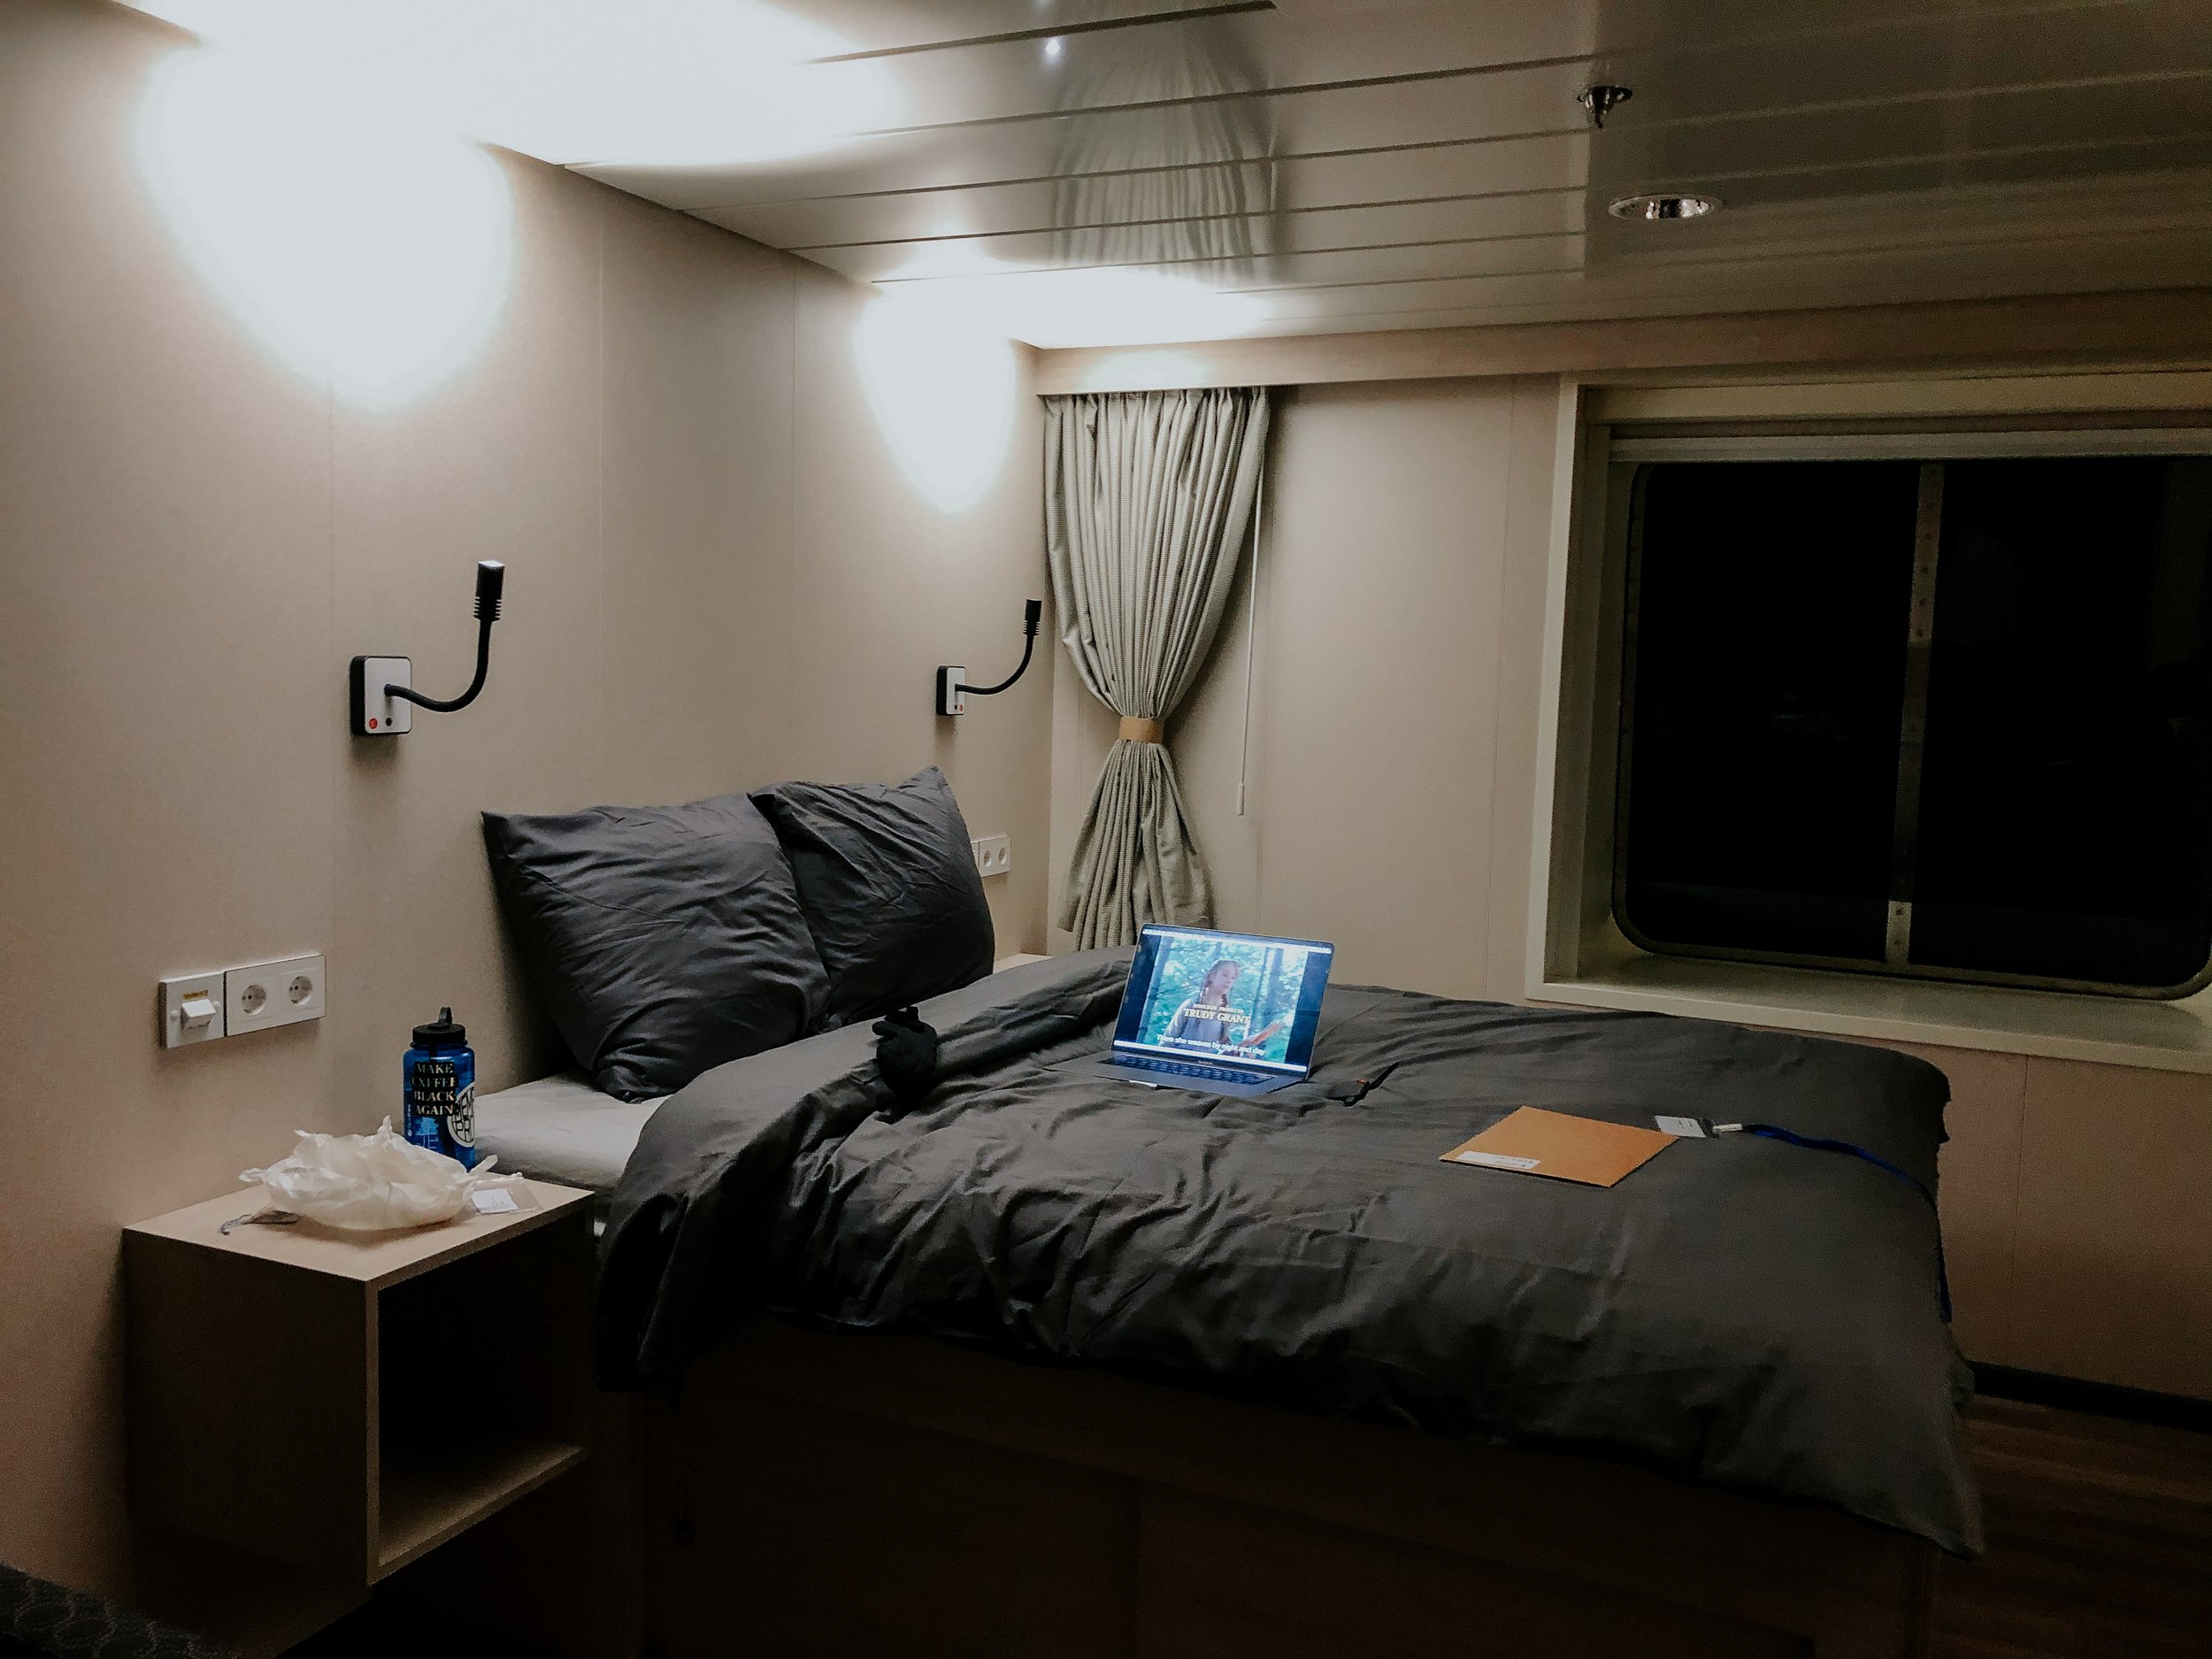 My first cabin on the Global Mercy (couples cabin)